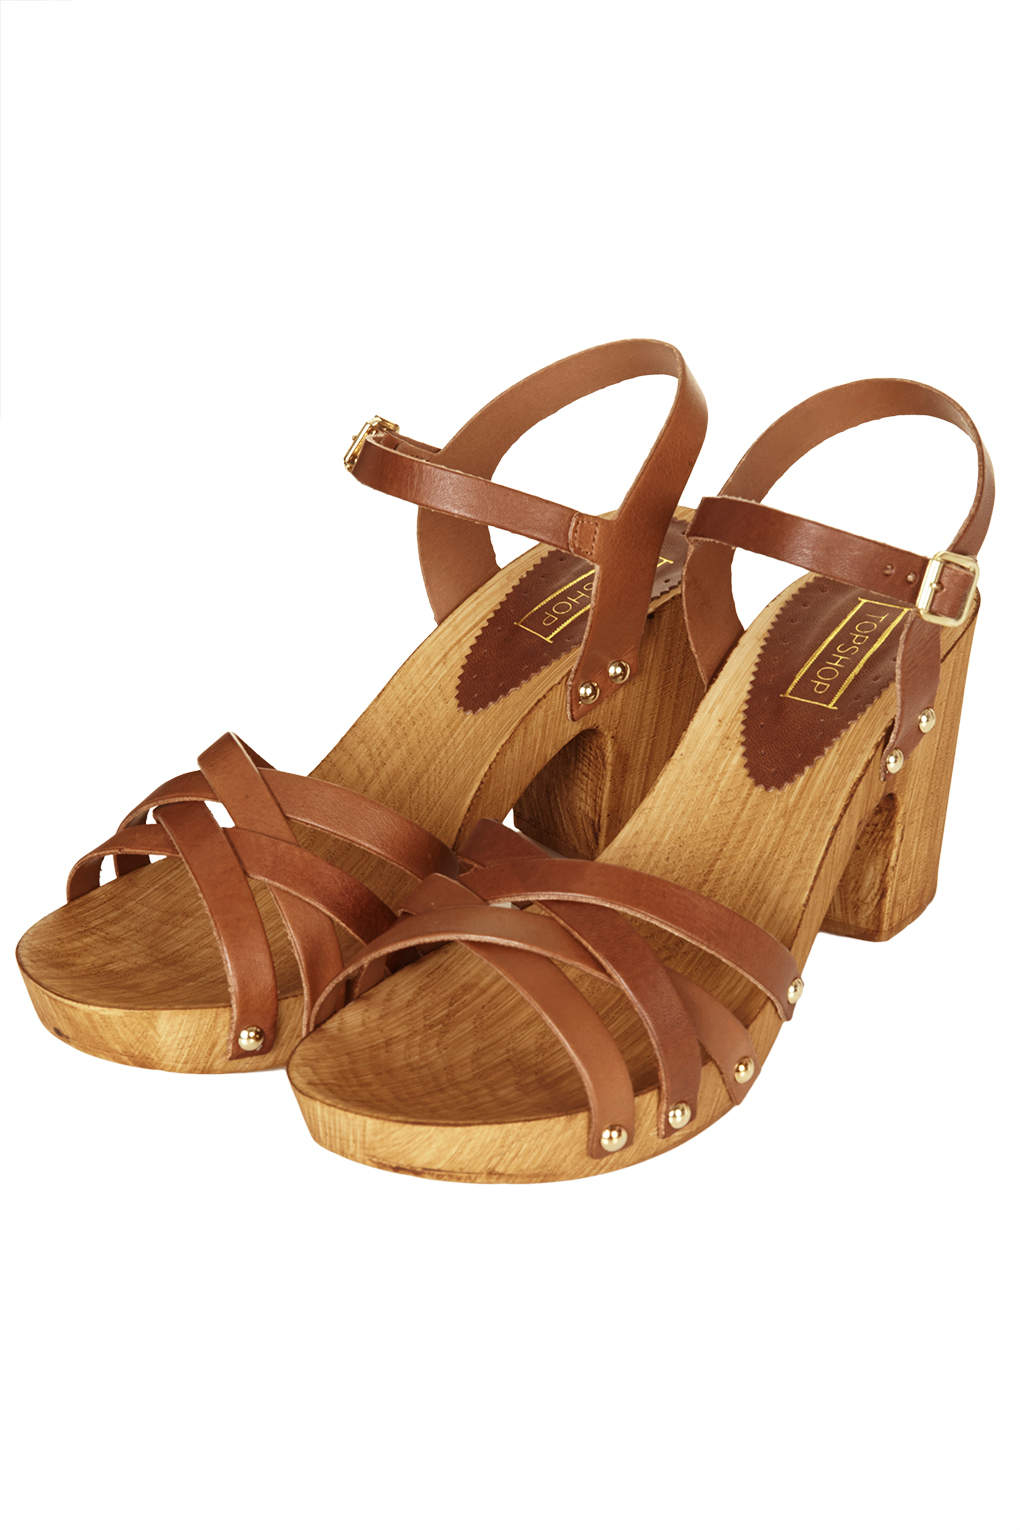 chunky wooden sandals